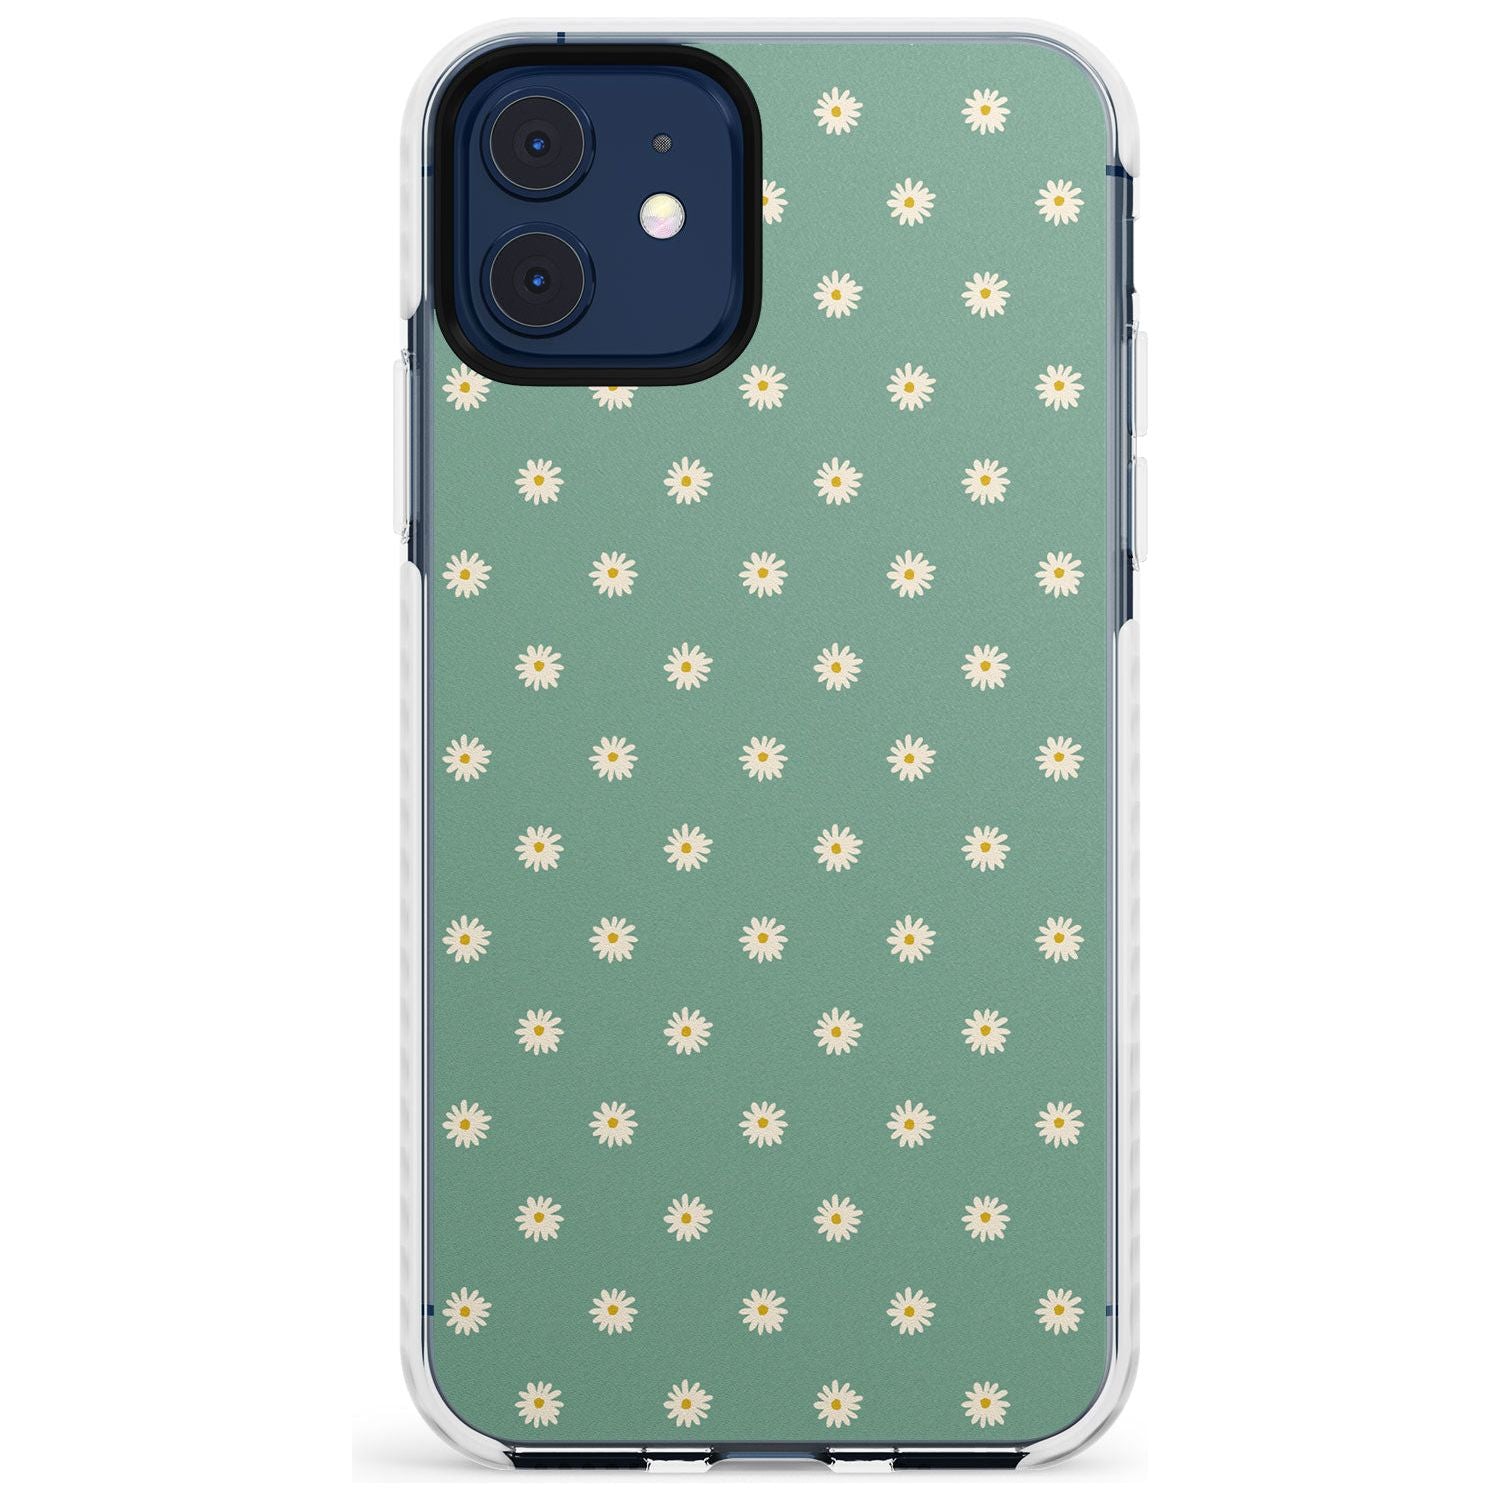 Daisy Pattern - Teal Cute Floral Daisy Design Slim TPU Phone Case for iPhone 11